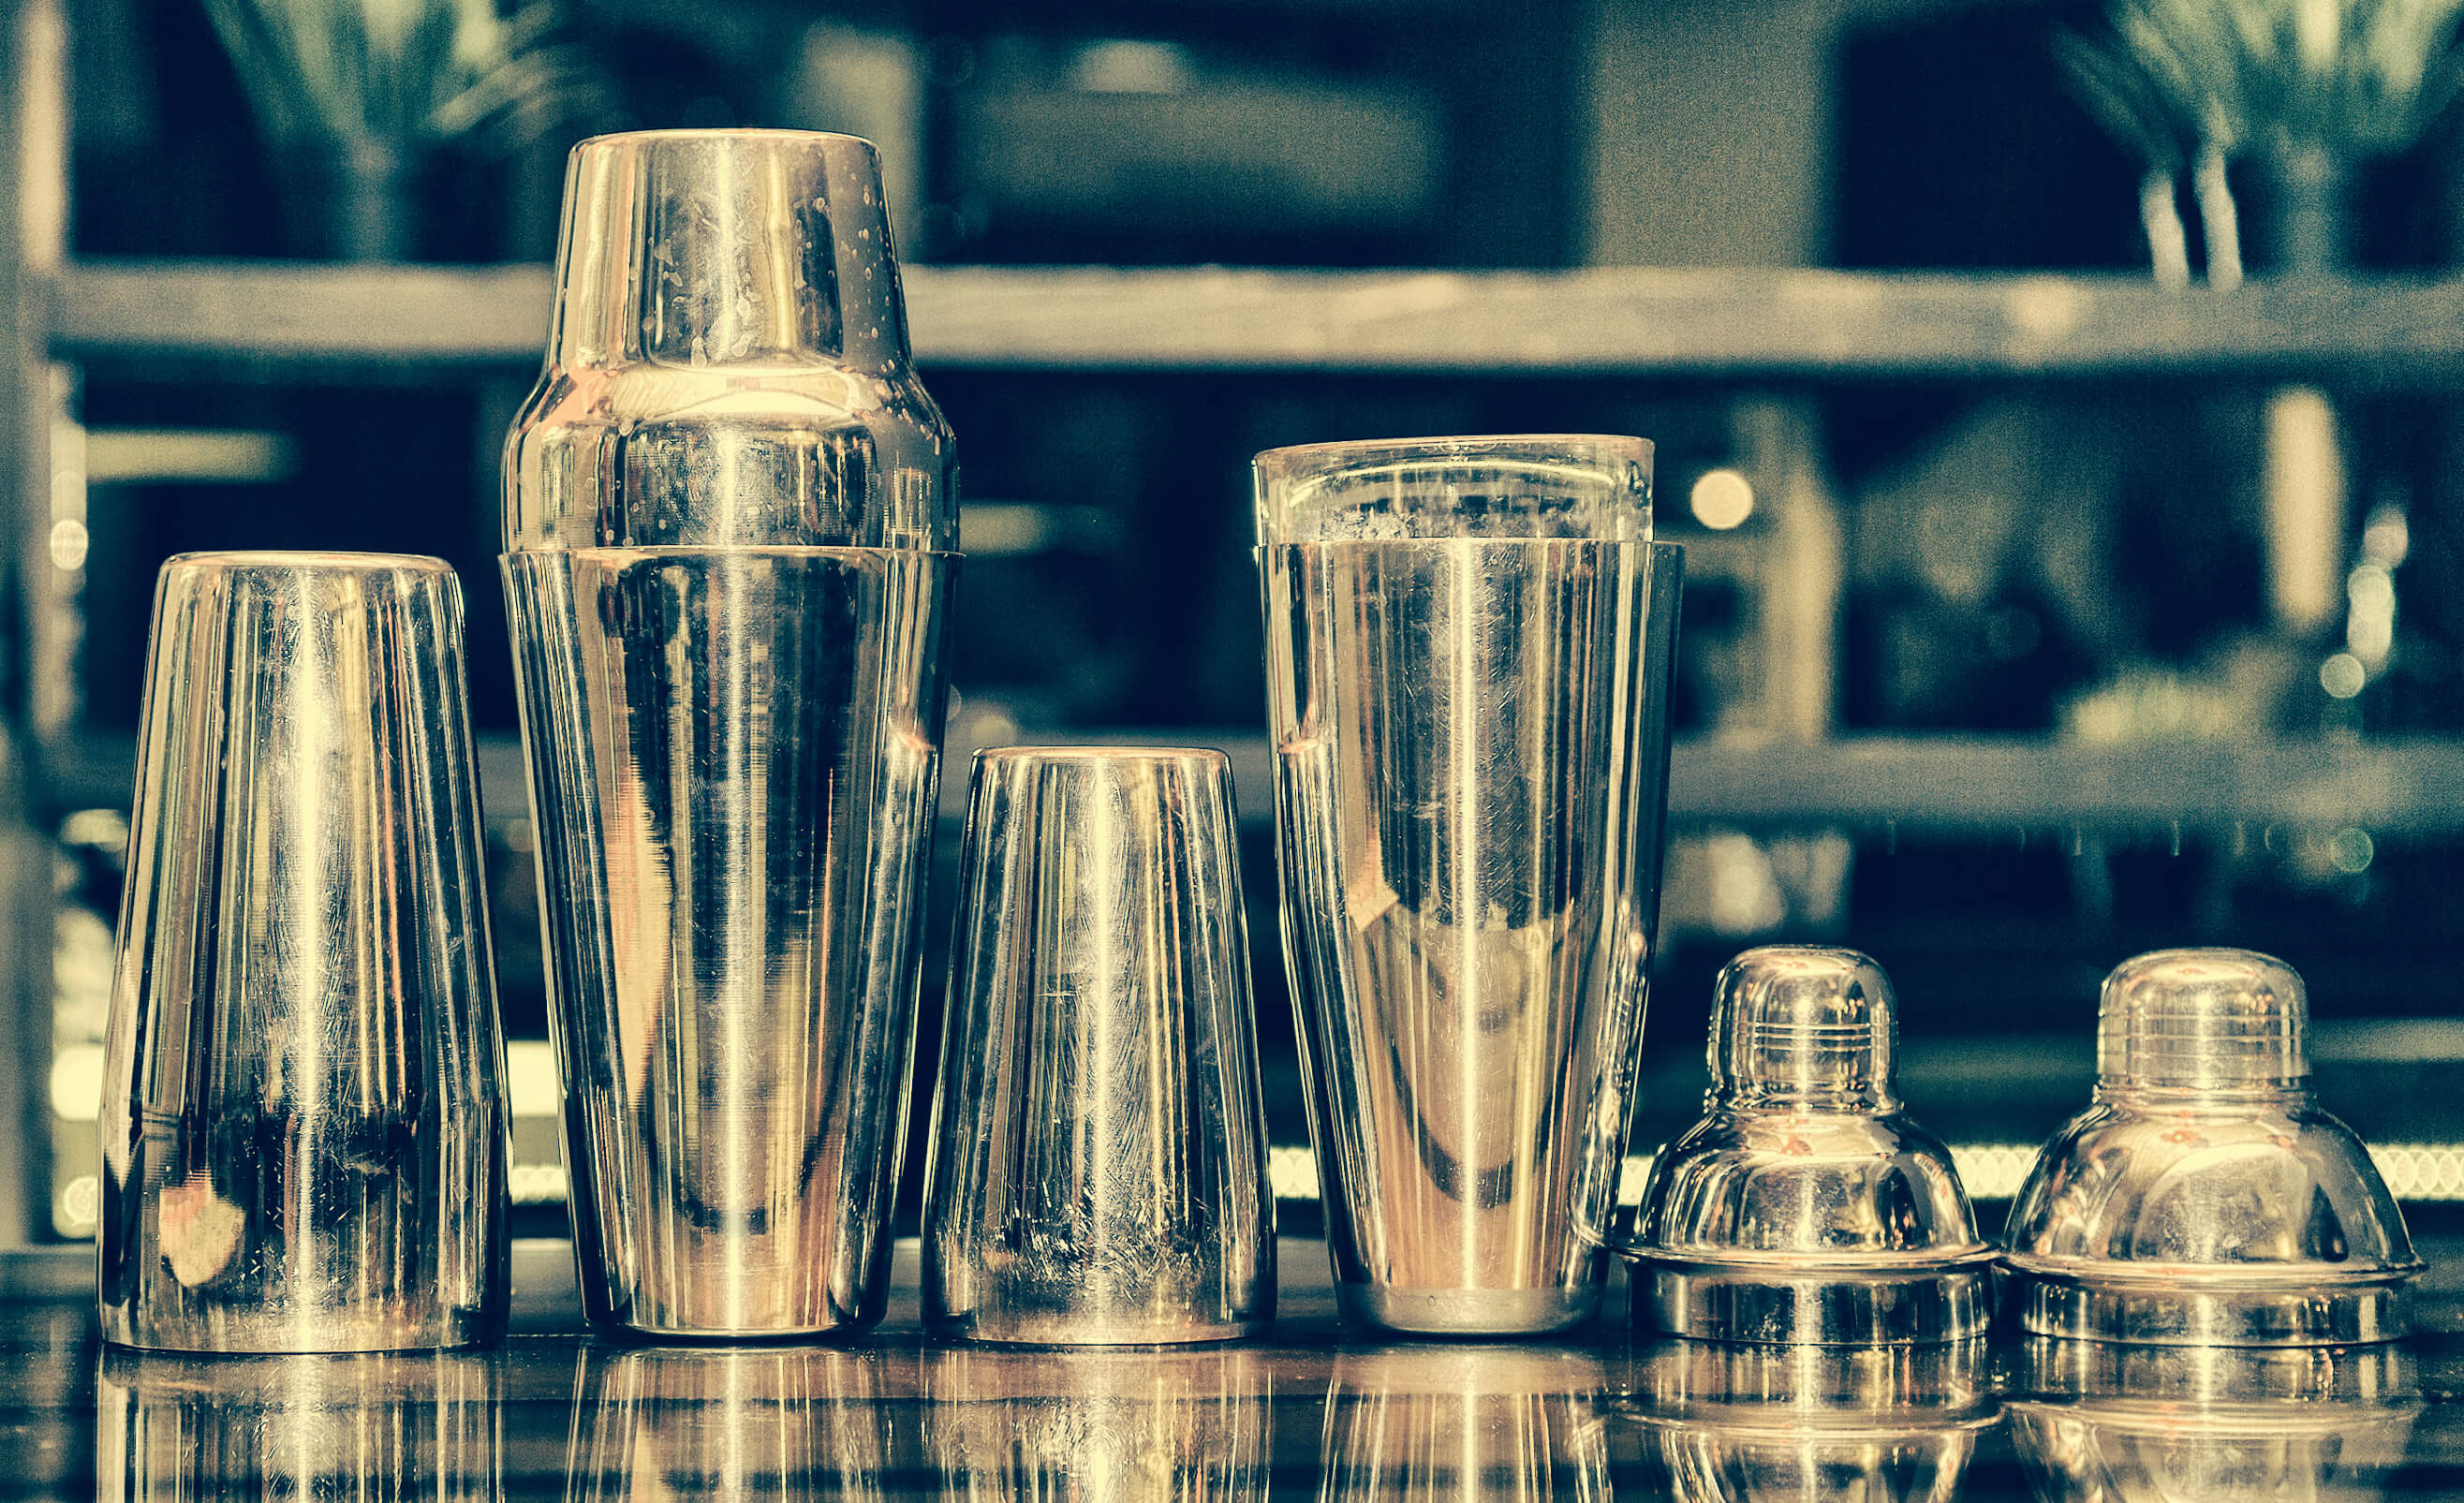 Stainless steel cocktail shakers on a bar